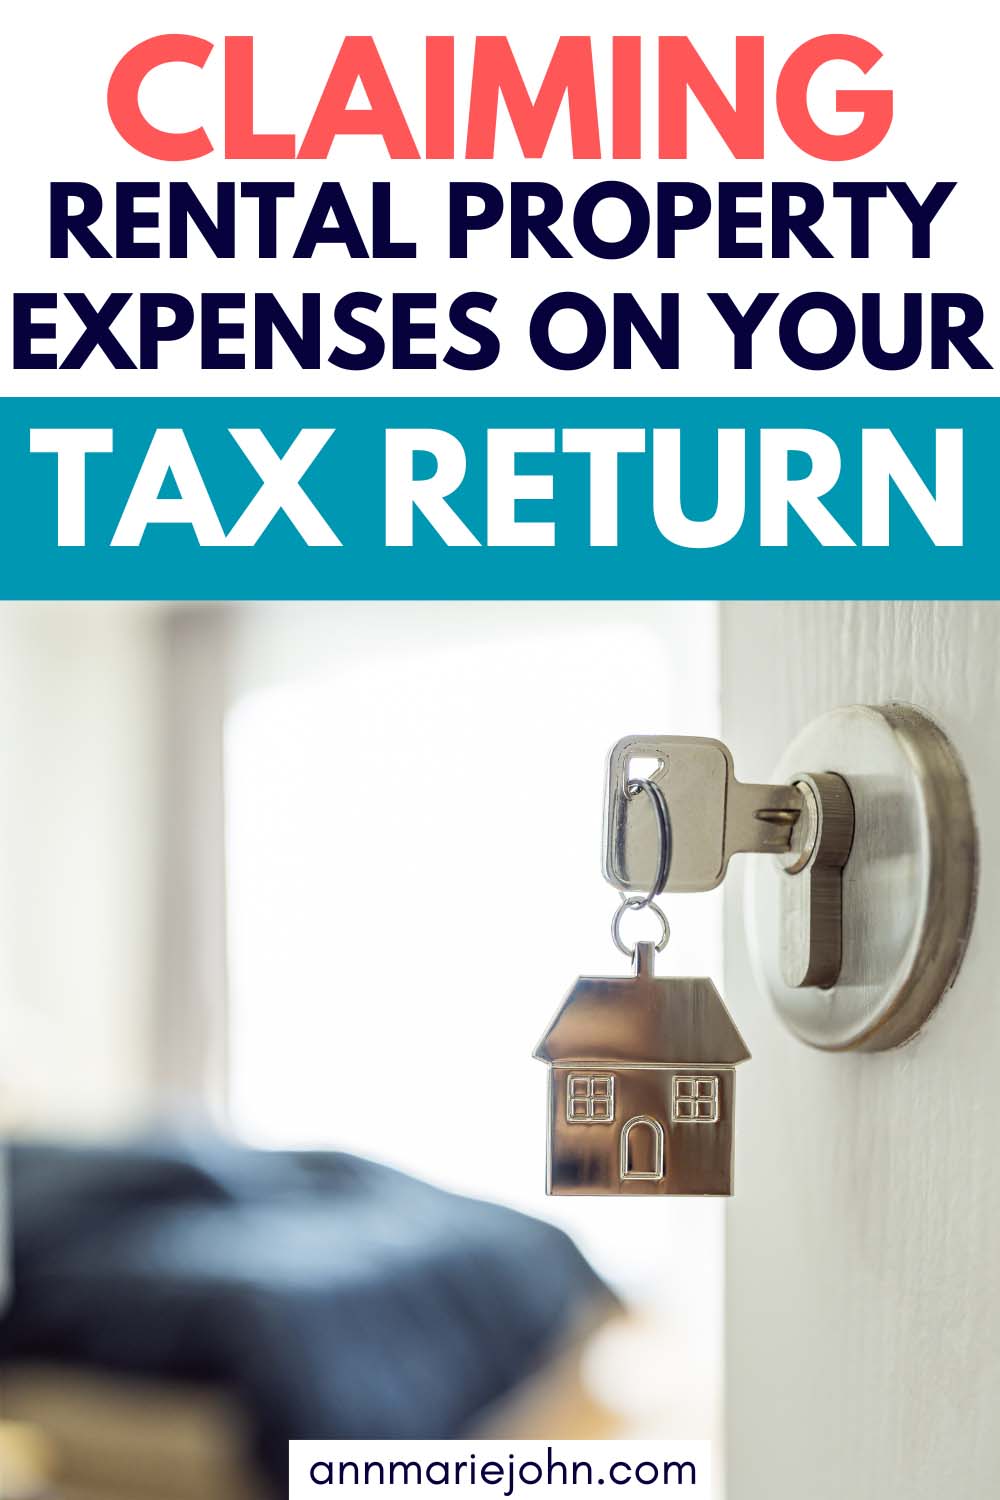 Claiming Rental Property Expenses